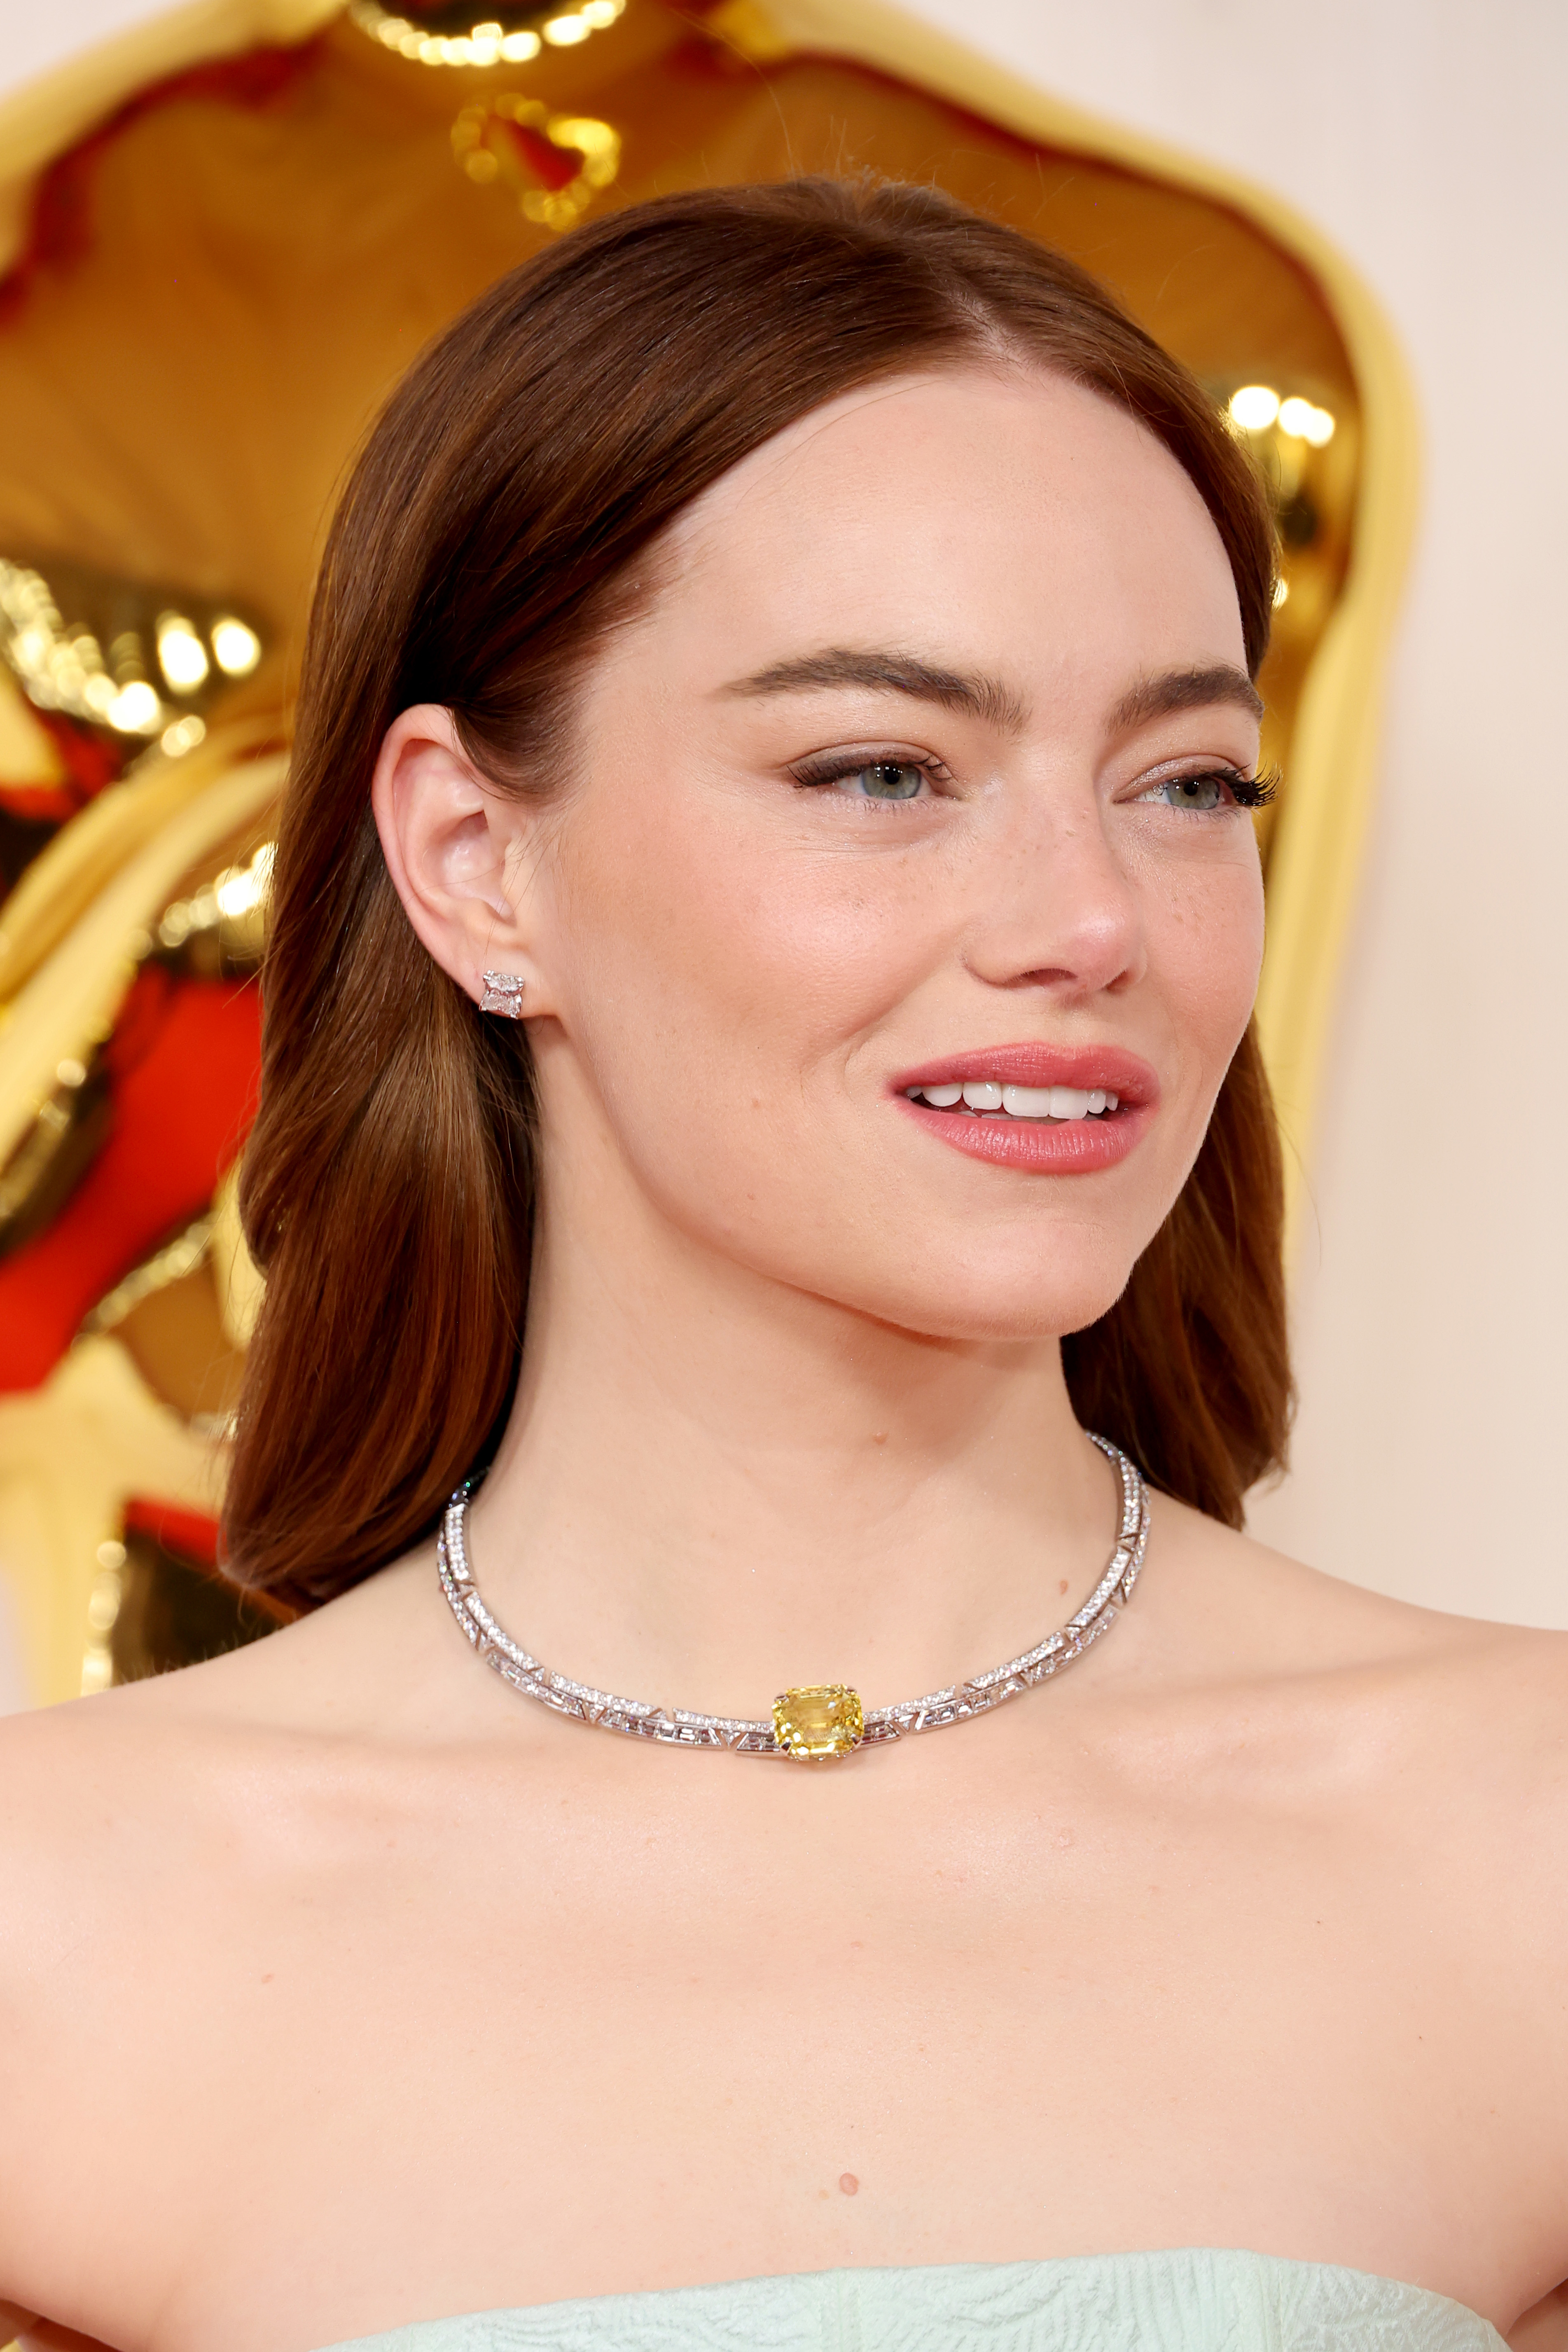 Emma Stone in a bejeweled necklace